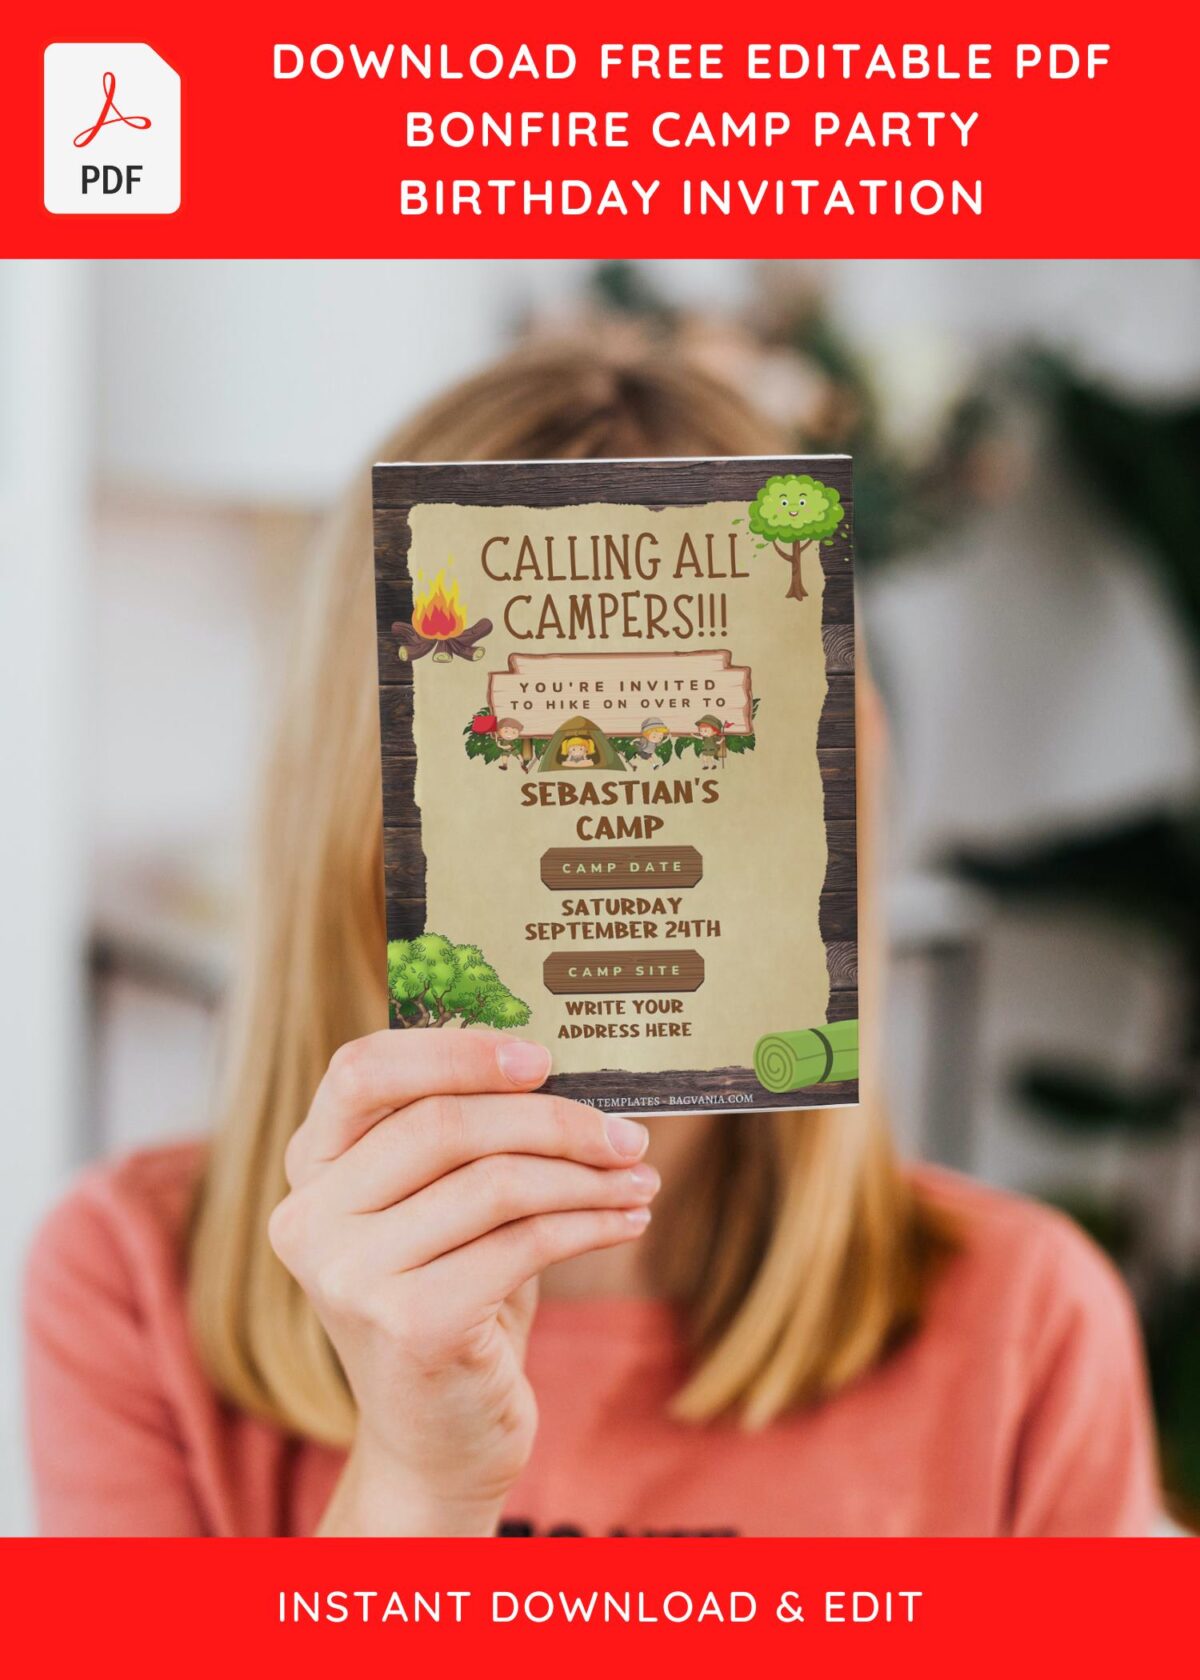 (Free Editable PDF) Camping Kids Birthday Invitation Templates with catchy wording